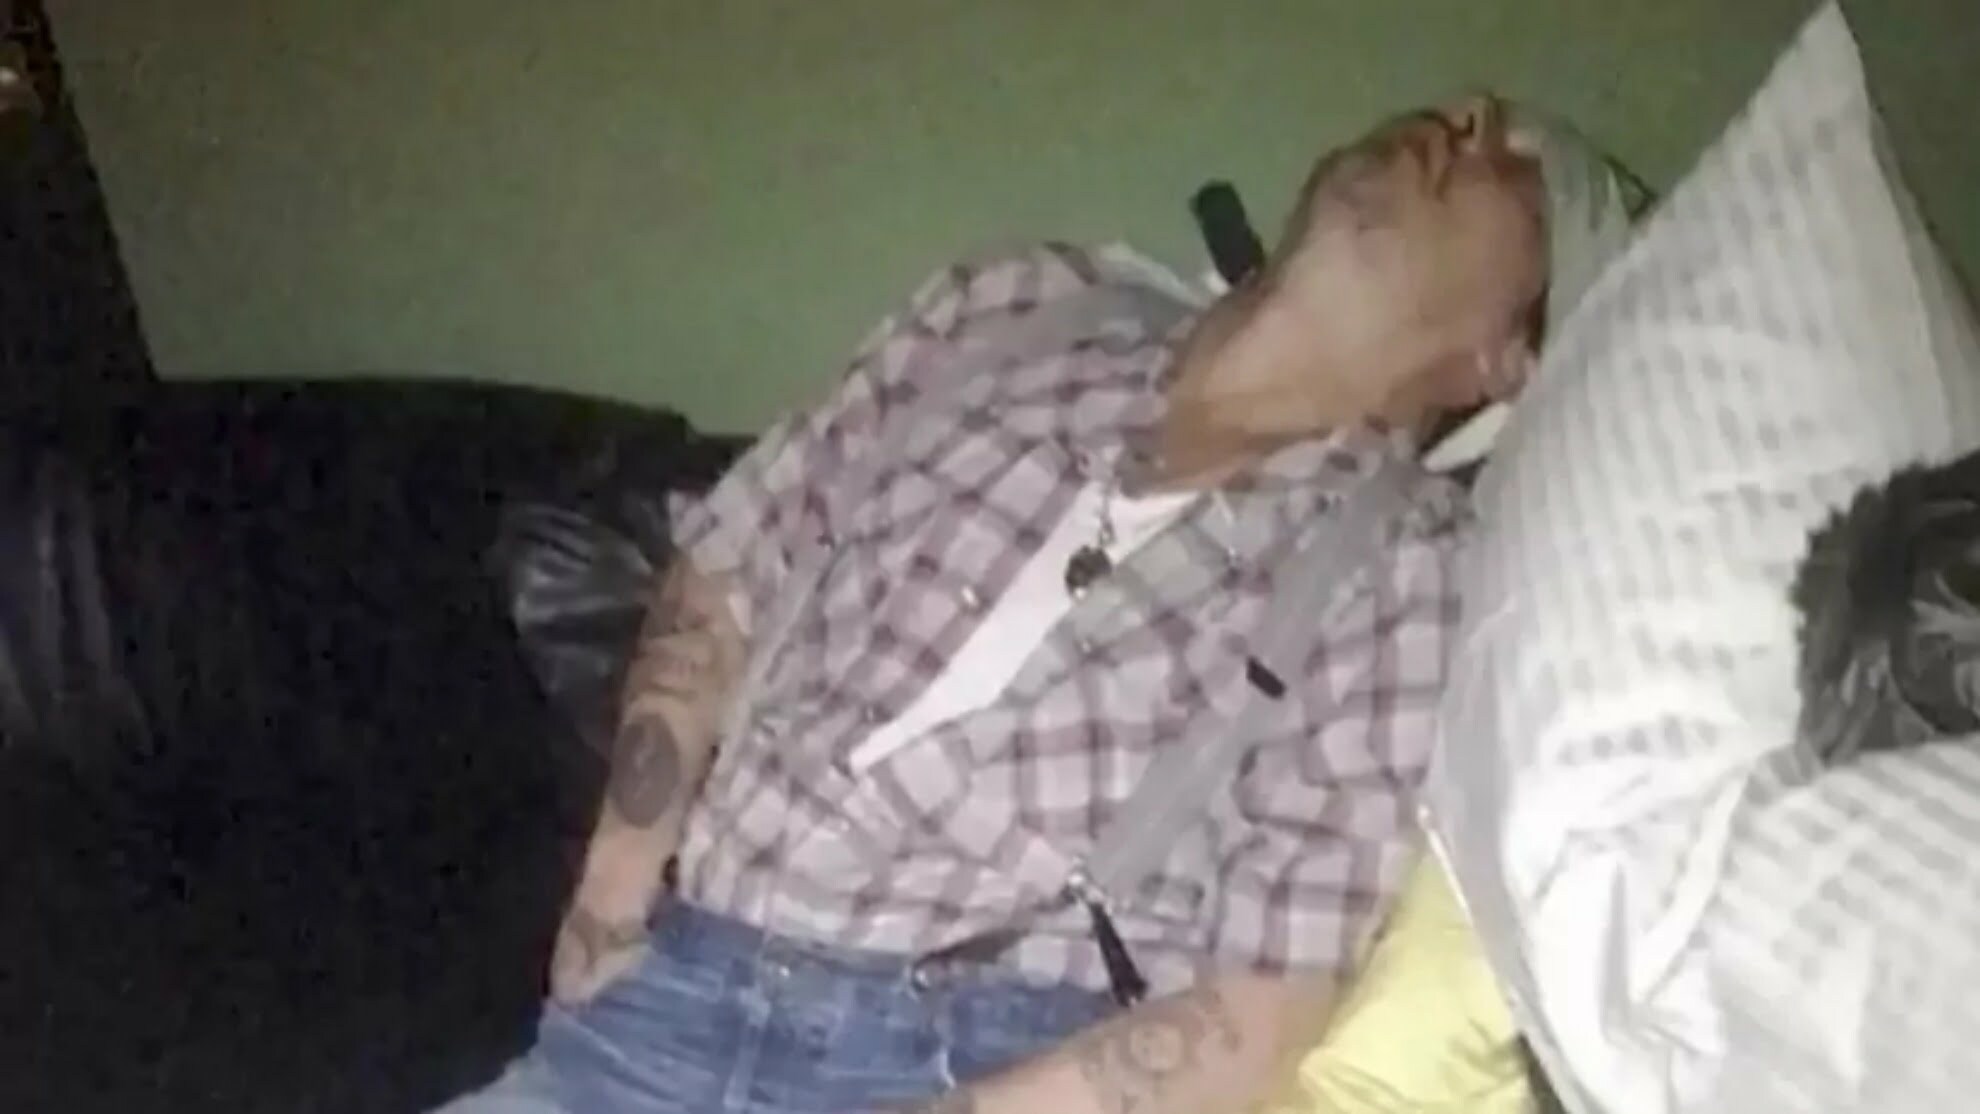 Johnny Depp is said to have passed out